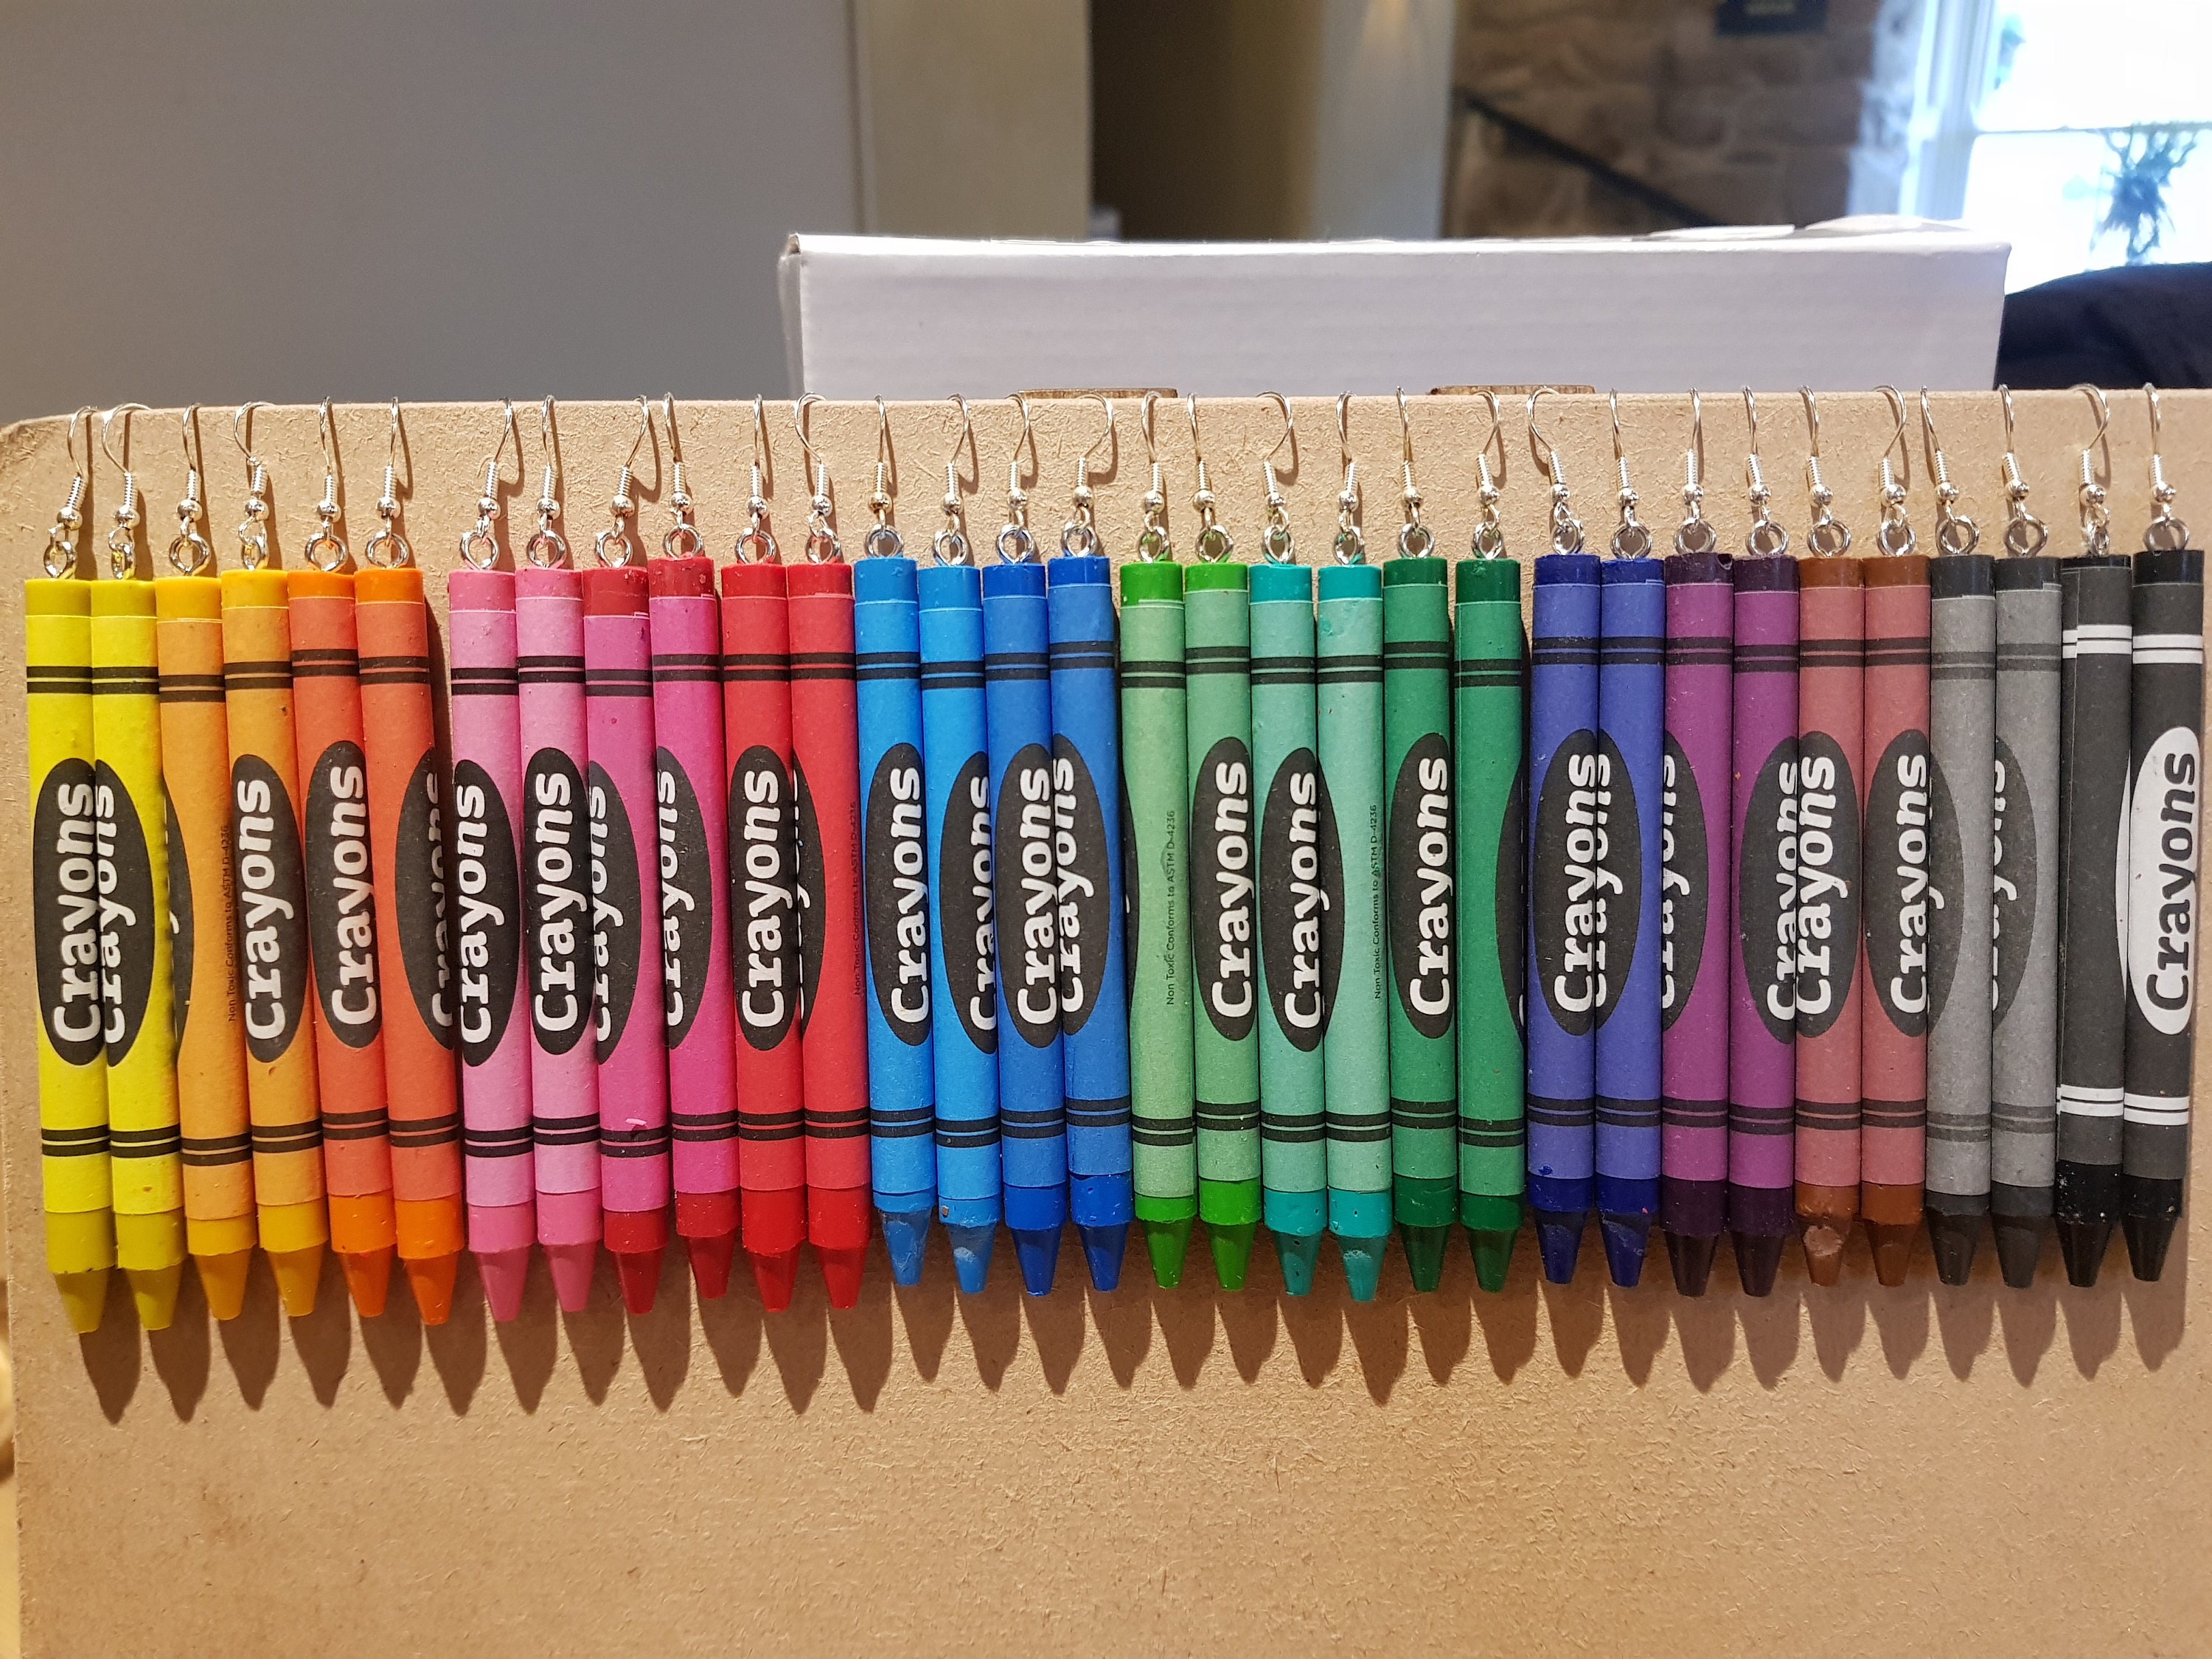 Crayola 8 Neon Washable Crayons, Set of Crayons, Fine Line, Washable, Non  Toxic, Gift for Boys Girls, Arts and Crafts, Gifting, Stocking -   Denmark